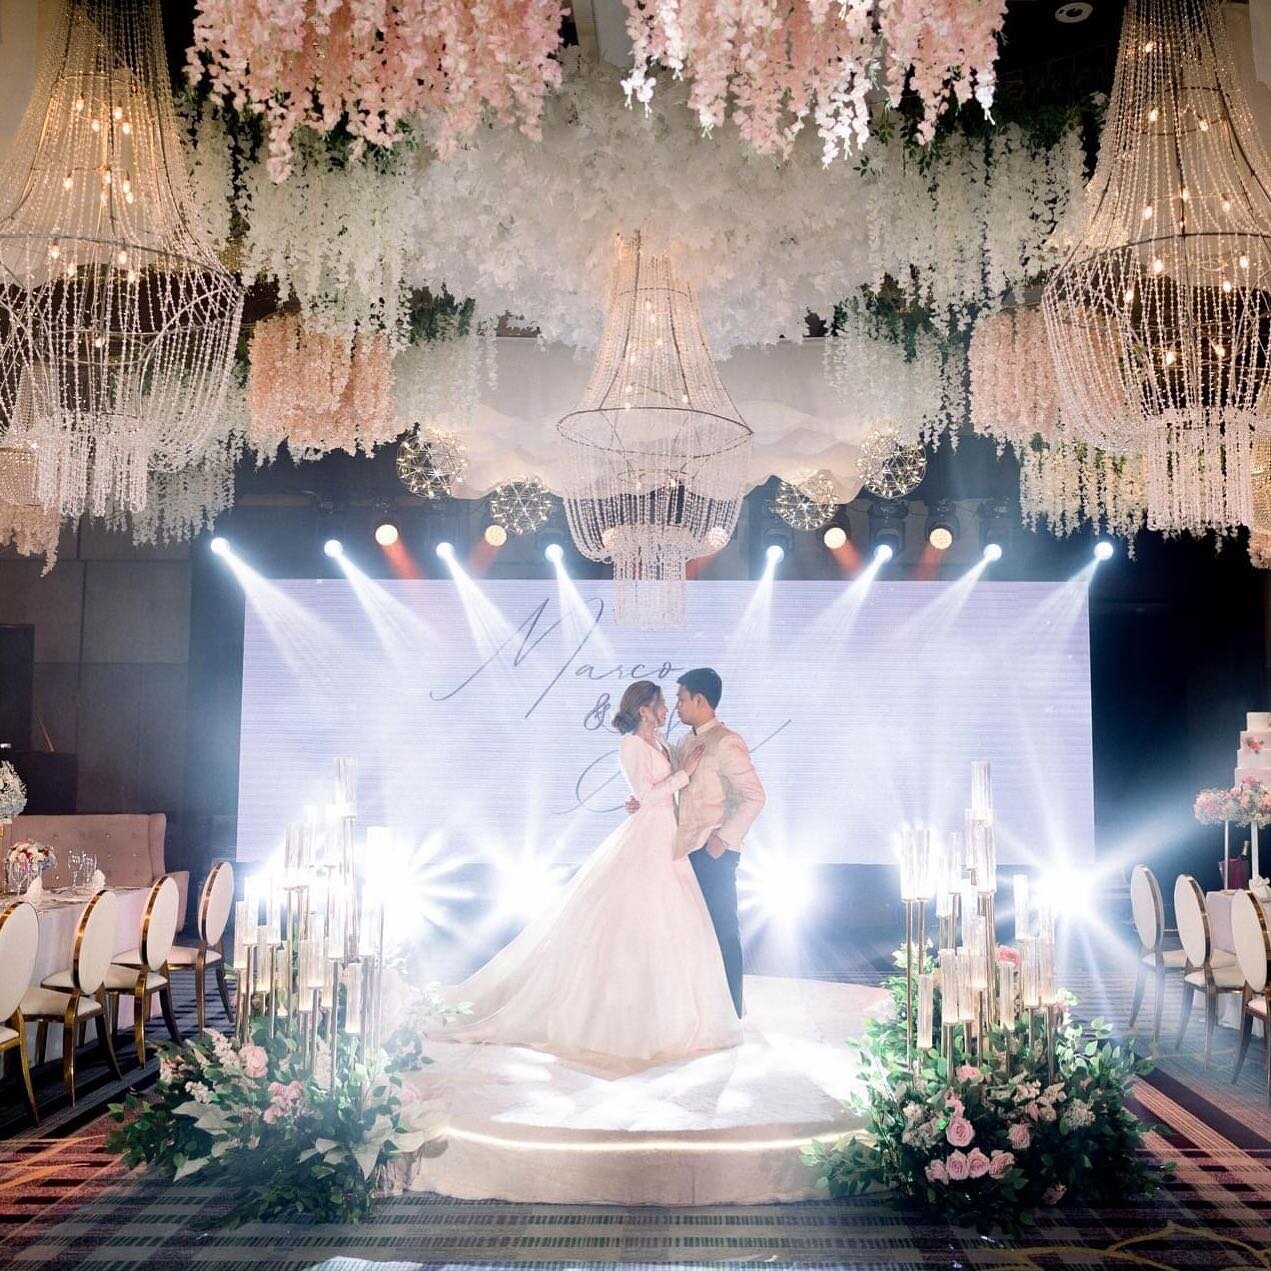 Simplicity is the purest form of anything. Nothing too loud, nothing too extravagant, it is enough.
.
.
.
📸 credits: @marcoconstantinophotos | @arrazaevents @livelevelsproaudioandlights  #MainEventsph #weddings #weddingsph #weddingplanner #weddingco